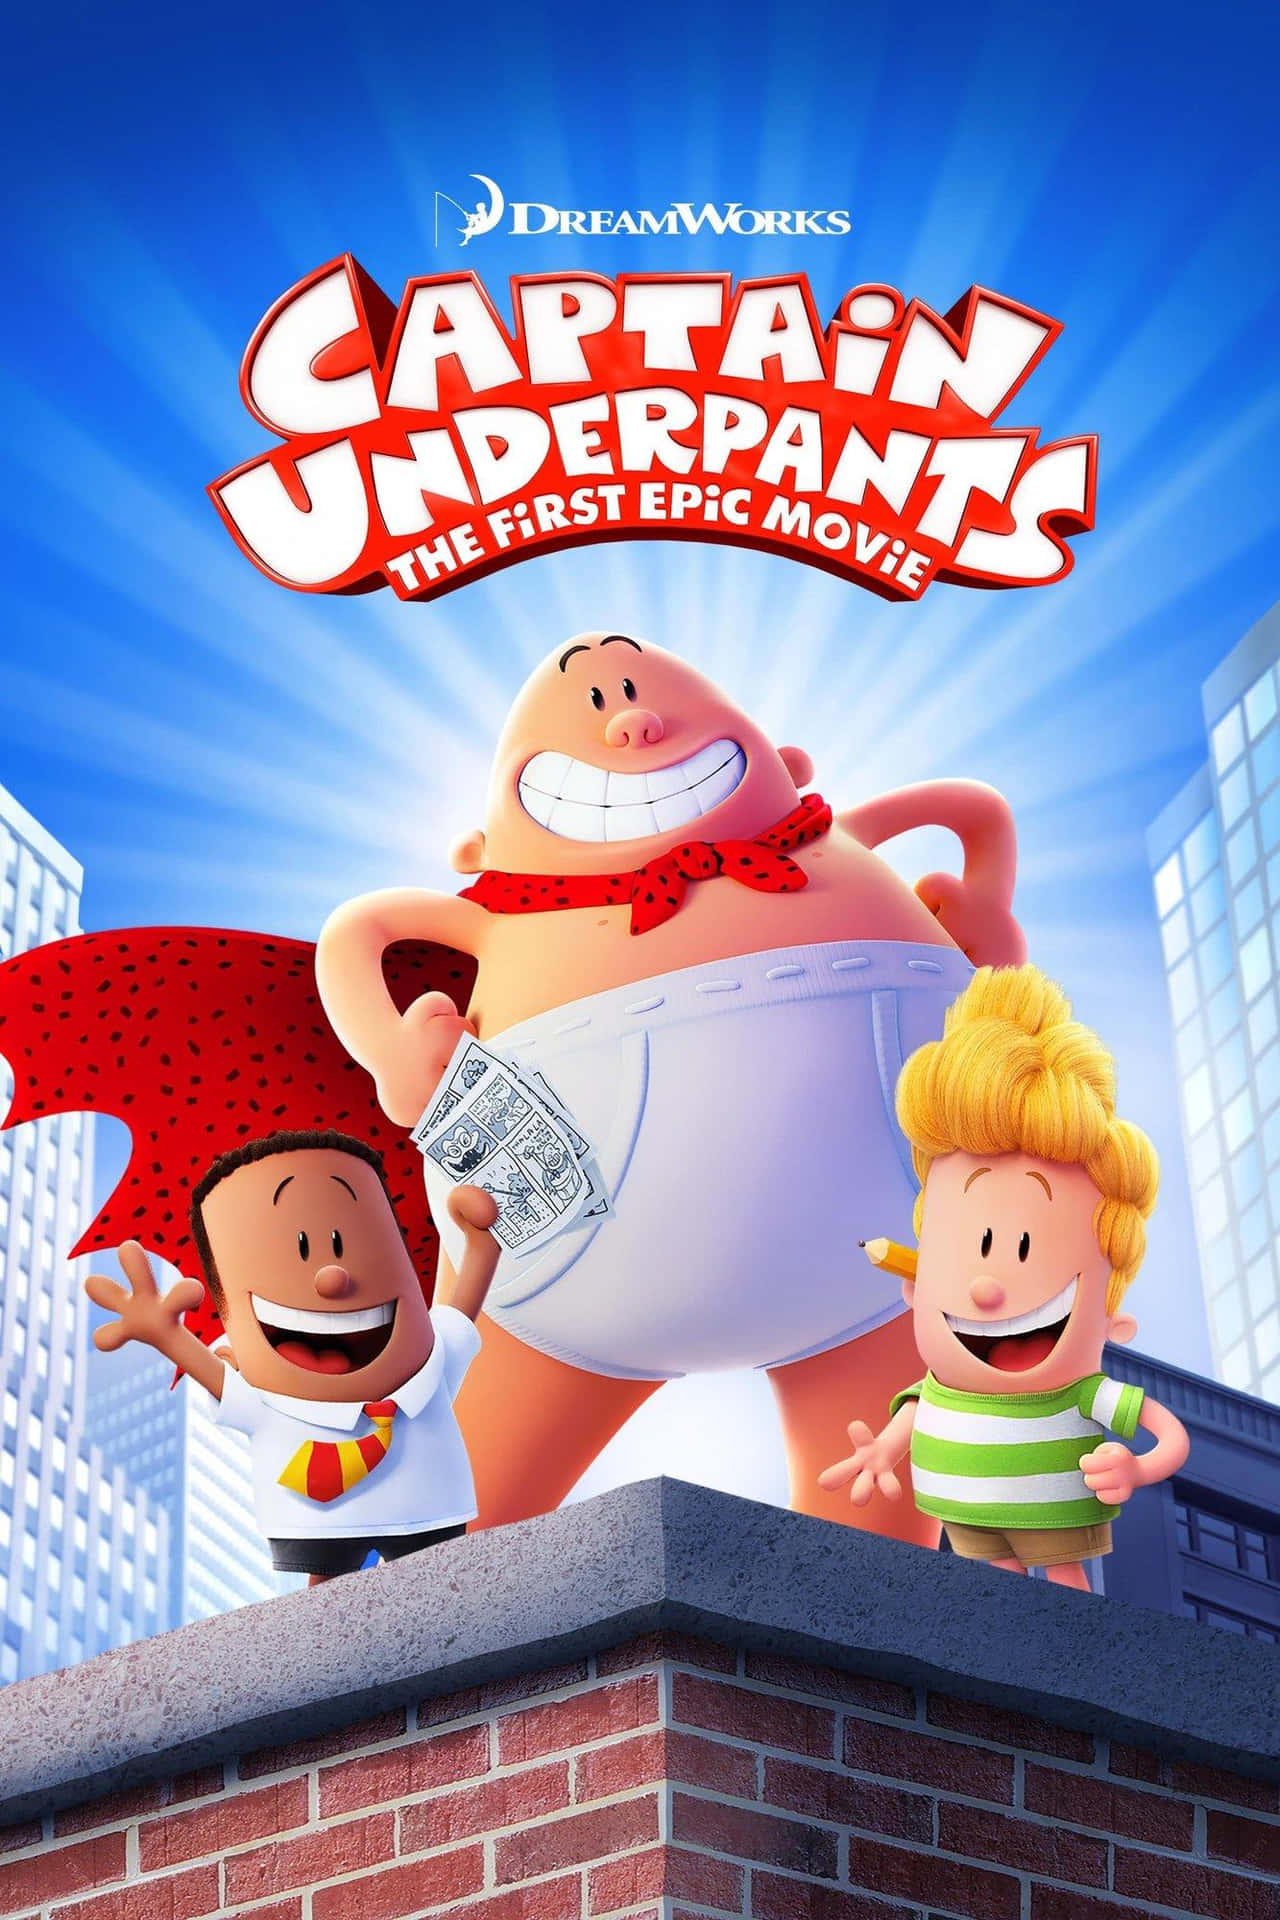 Blue Sky Behind Captain Underpants: The First Epic Movie Wallpaper